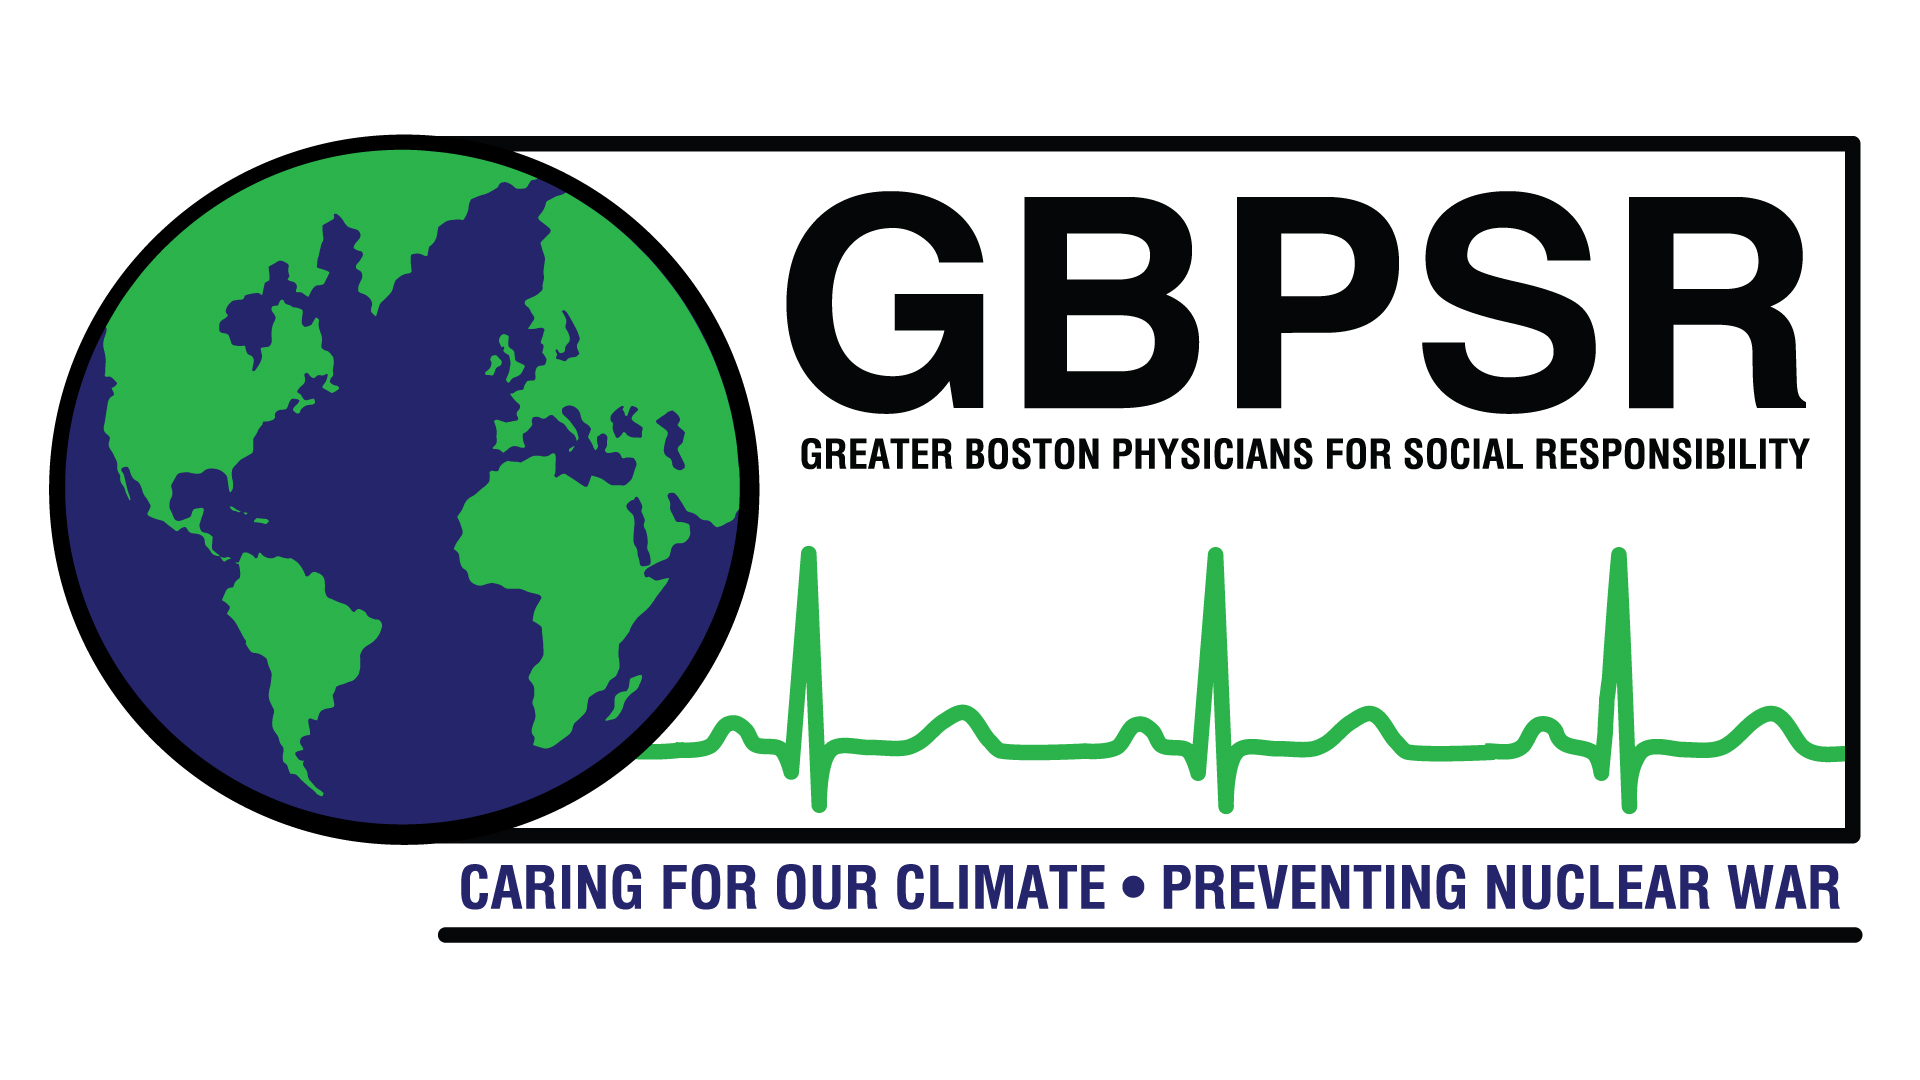 Physicians for Social Responsibility, Greater Boston Chapter